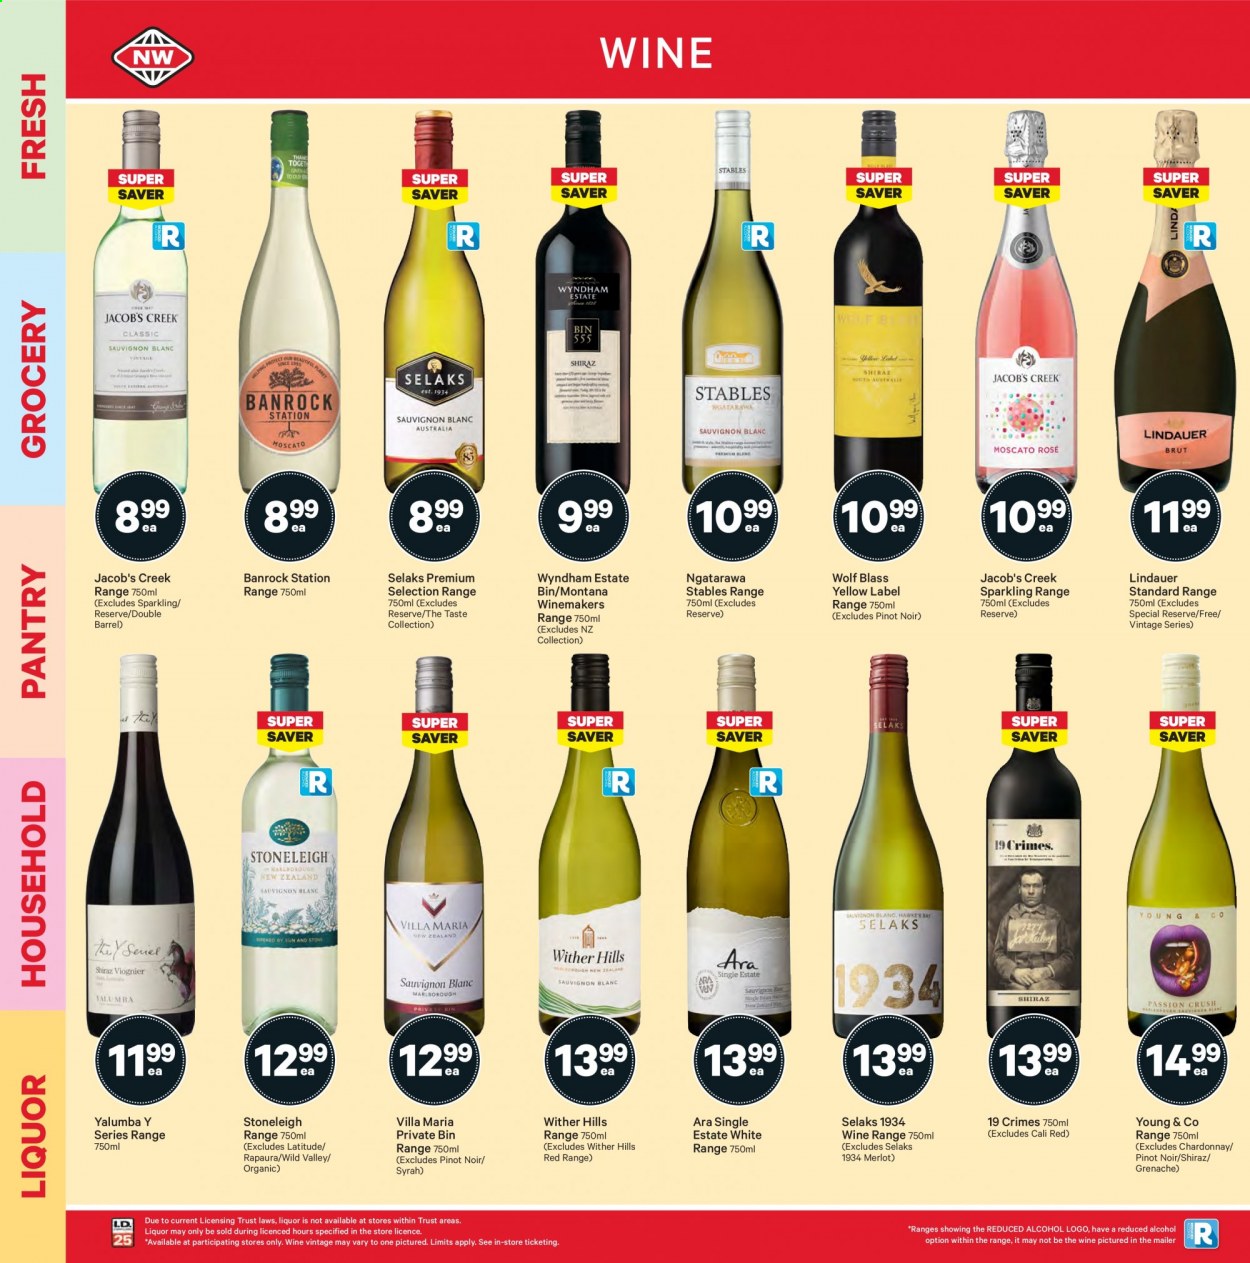 thumbnail - New World mailer - 06.09.2021 - 12.09.2021 - Sales products - red wine, sparkling wine, white wine, Chardonnay, wine, Merlot, Pinot Noir, Lindauer, alcohol, Wither Hills, Syrah, Jacob's Creek, Young & Co, Shiraz, Grenache. Page 26.